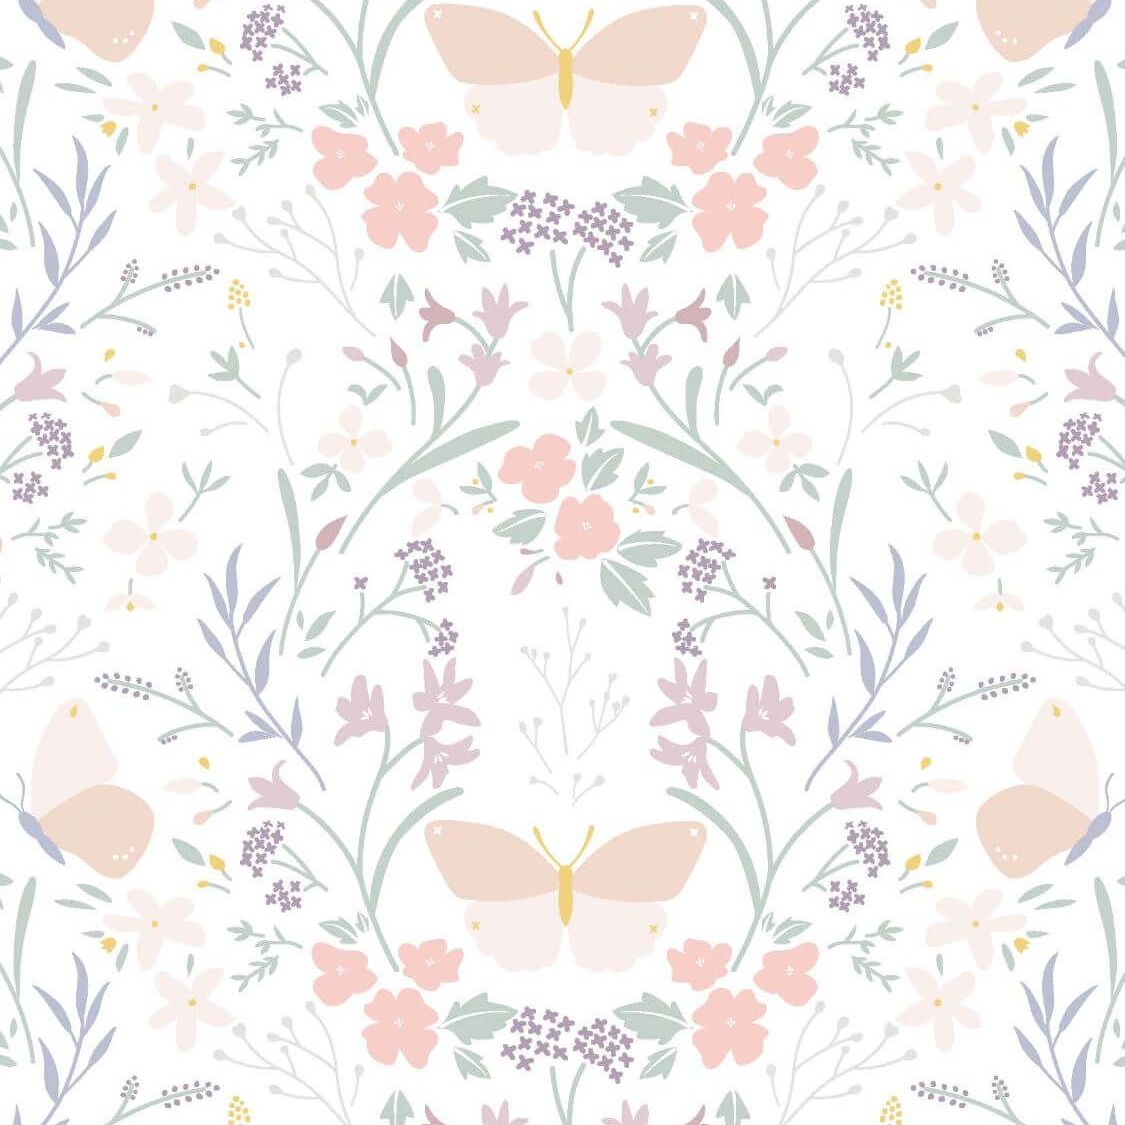 Lewis & Irene quilting cotton - Floral summer